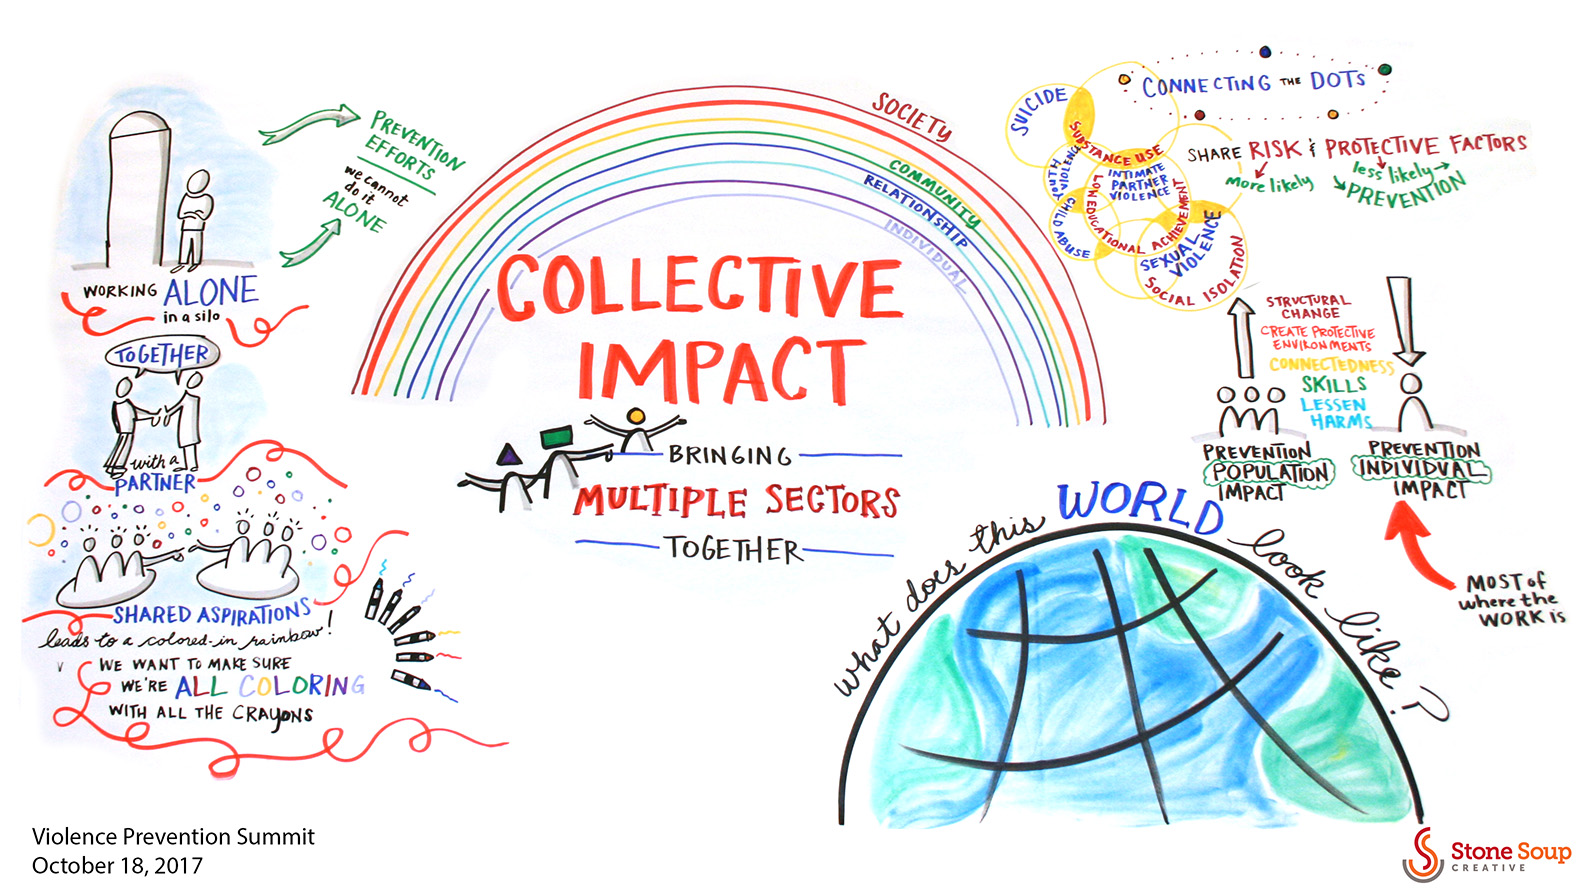 Violence prevention summit collective impact graphic recording